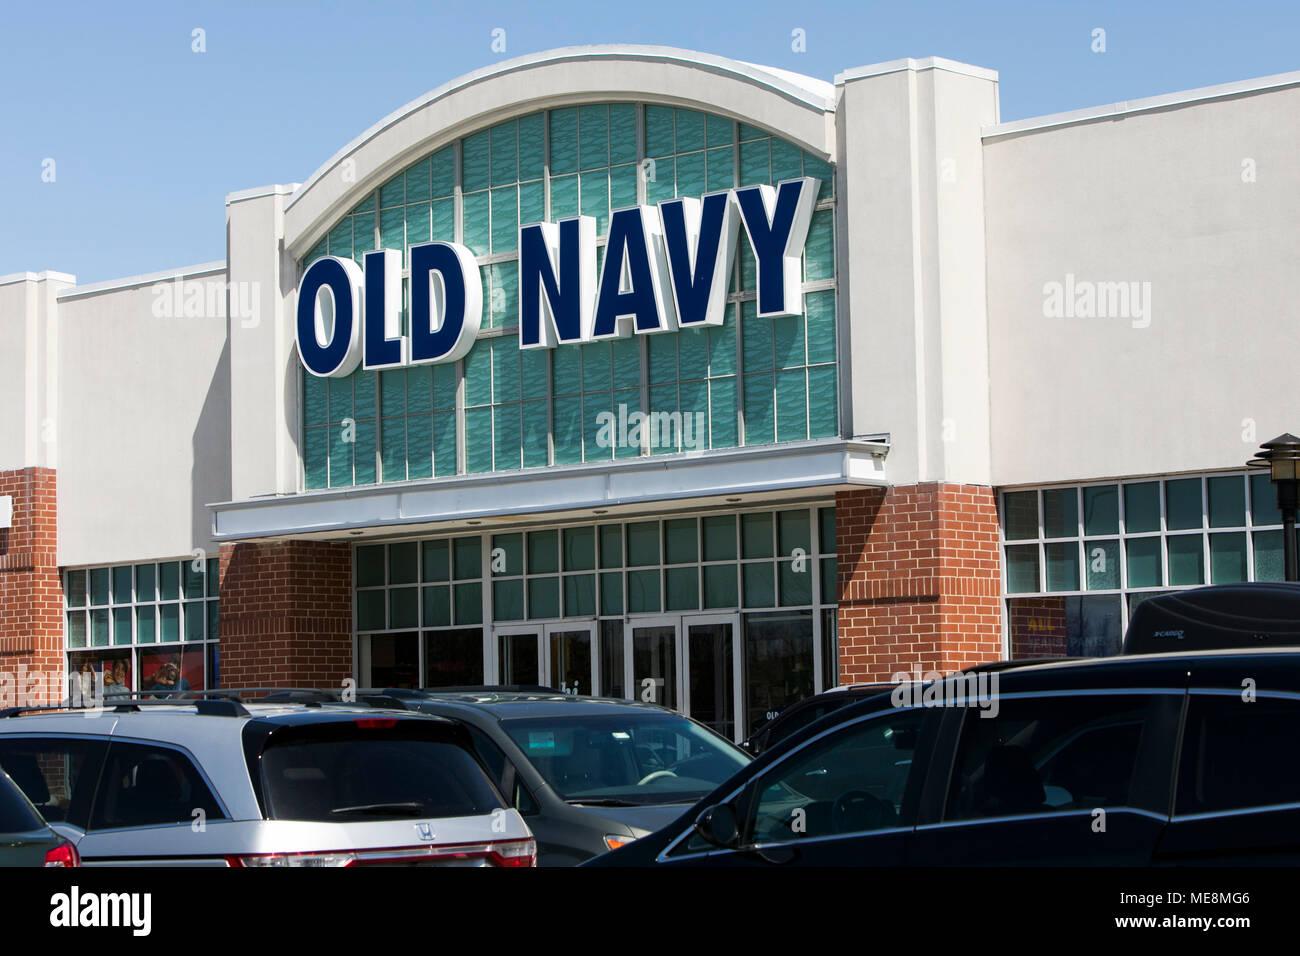 A logo sign outside of a Old Navy retail store location in Columbia, Maryland on April 20, 2018. Stock Photo